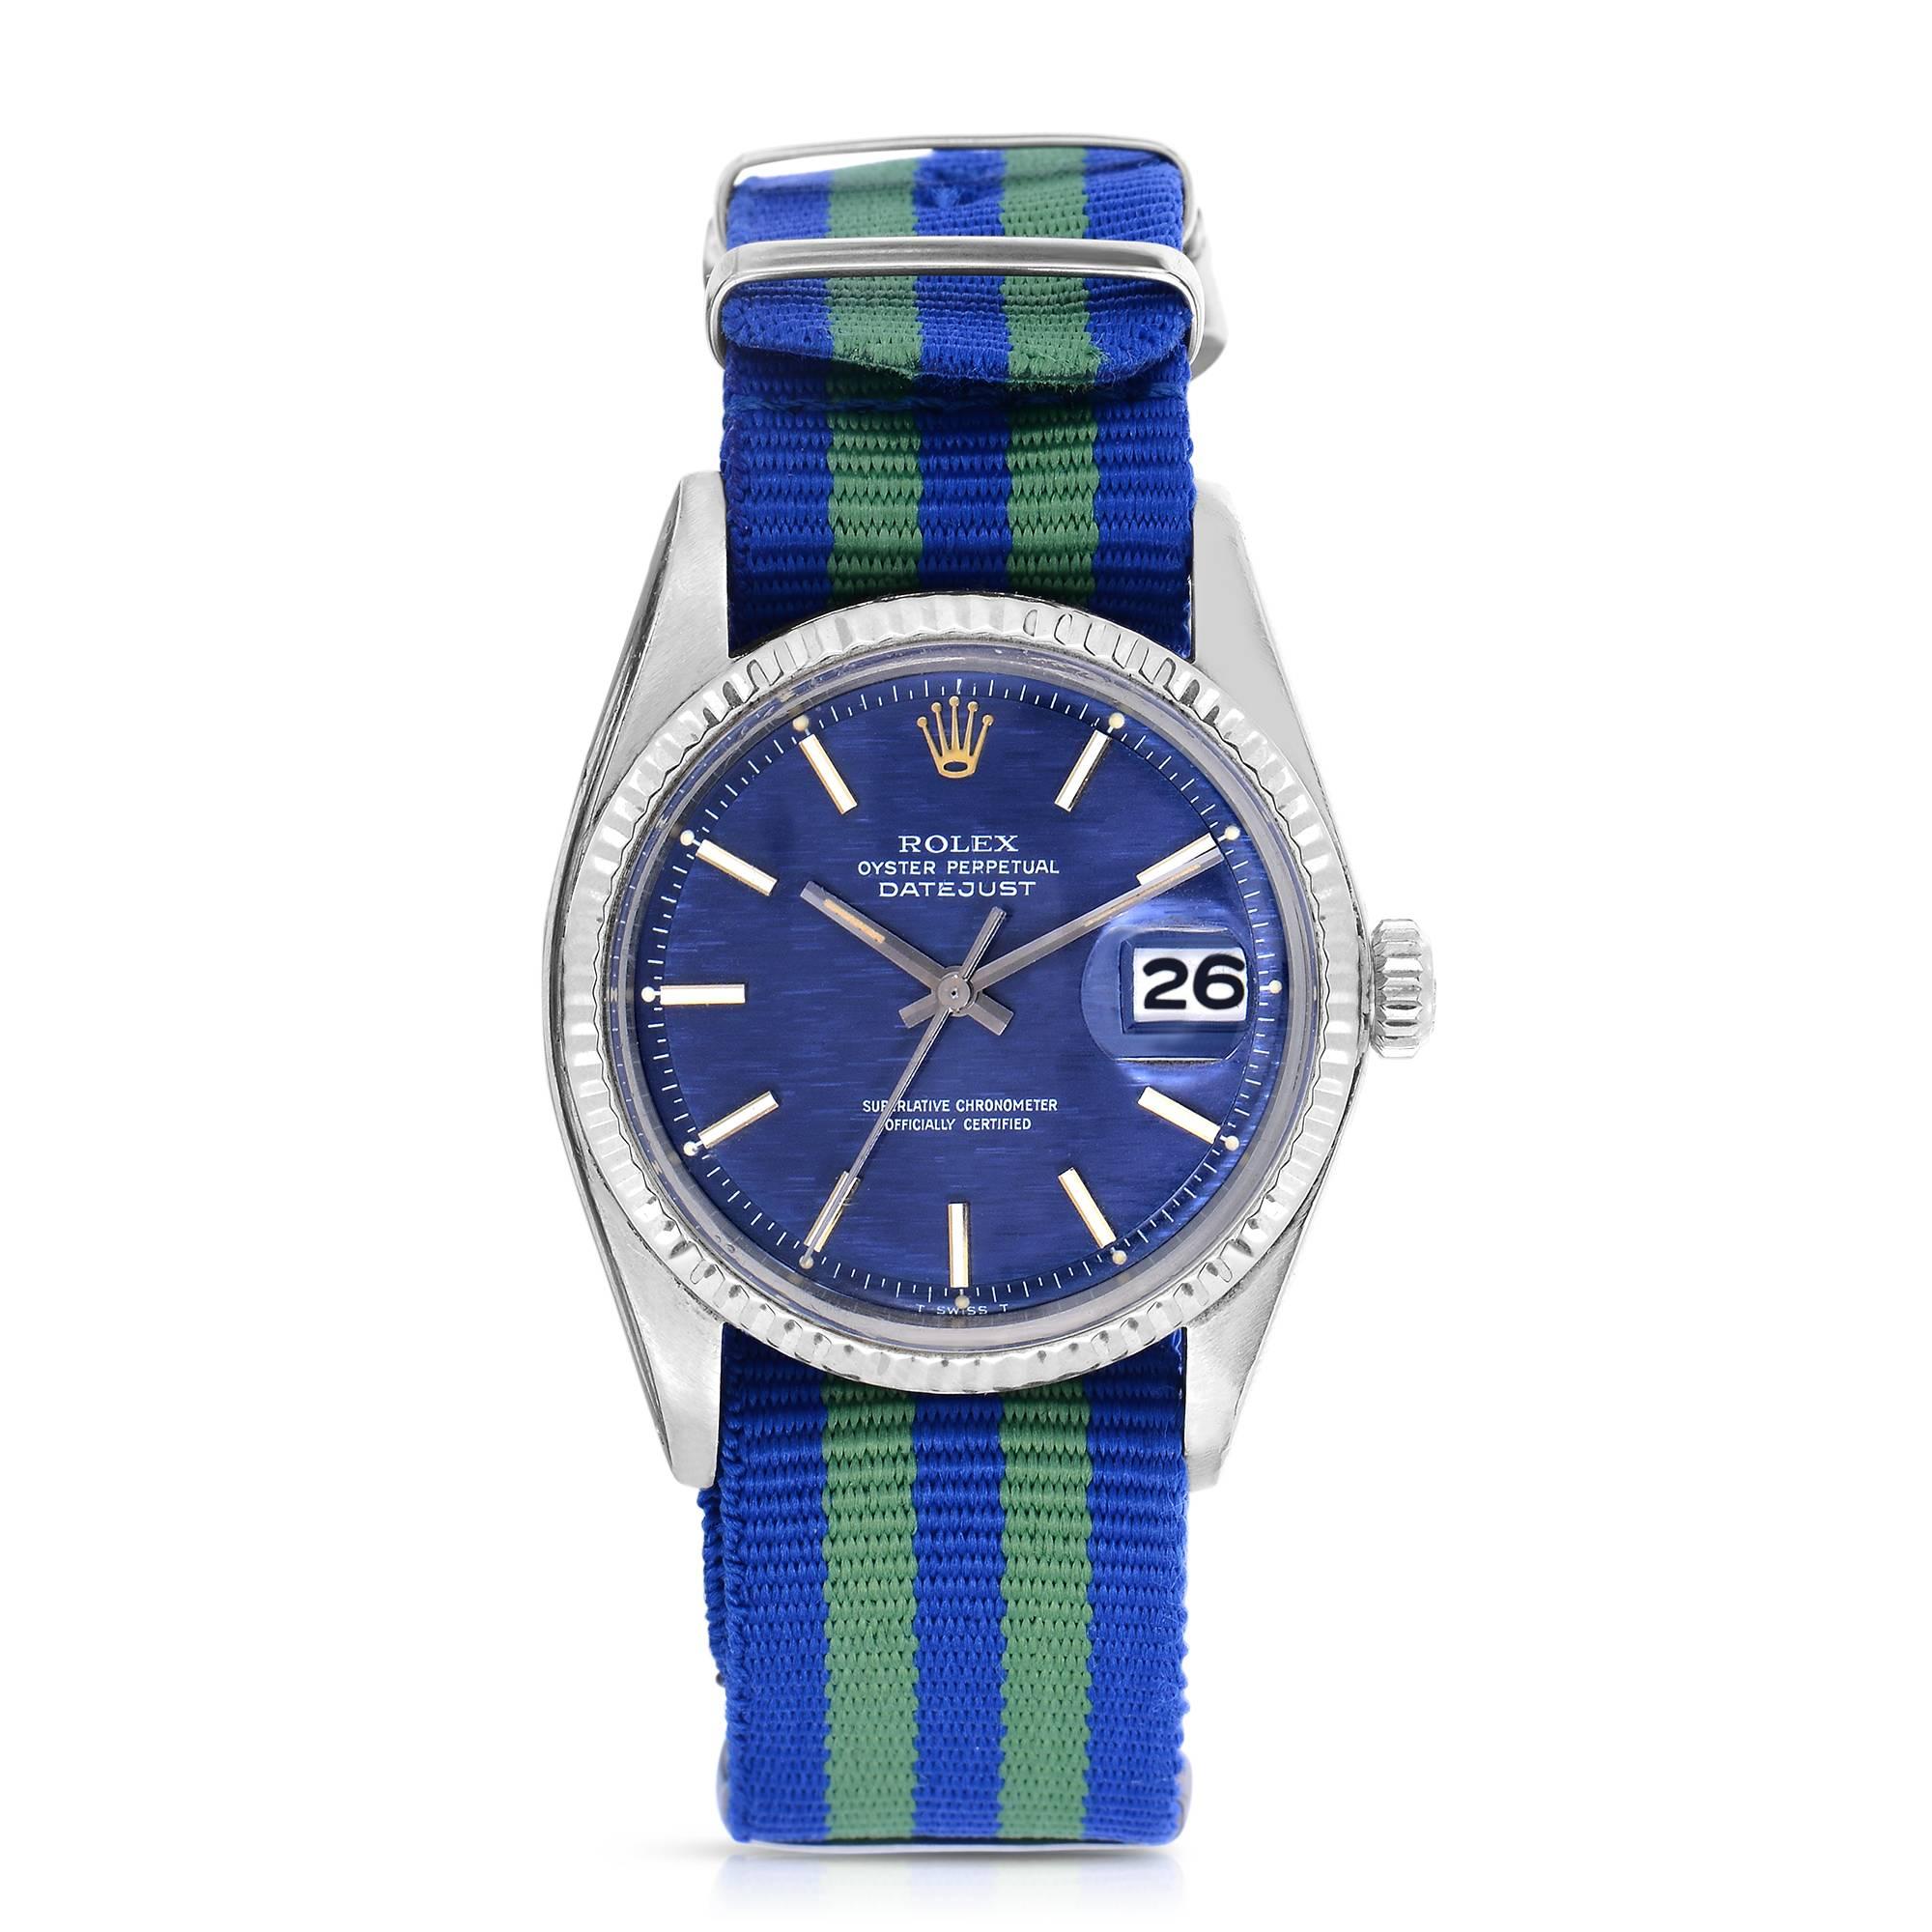 Vintage Rolex Oyster Perpetual Datejust
36mm in size
Stainless Steel Case
18K White Gold Case
Rare Blue Linen Dial
Date function at three o'clock
Blue and Green Striped Nato Nylon Strap
Acrylic Crystal
Screw Down Crown
One Year Warranty on